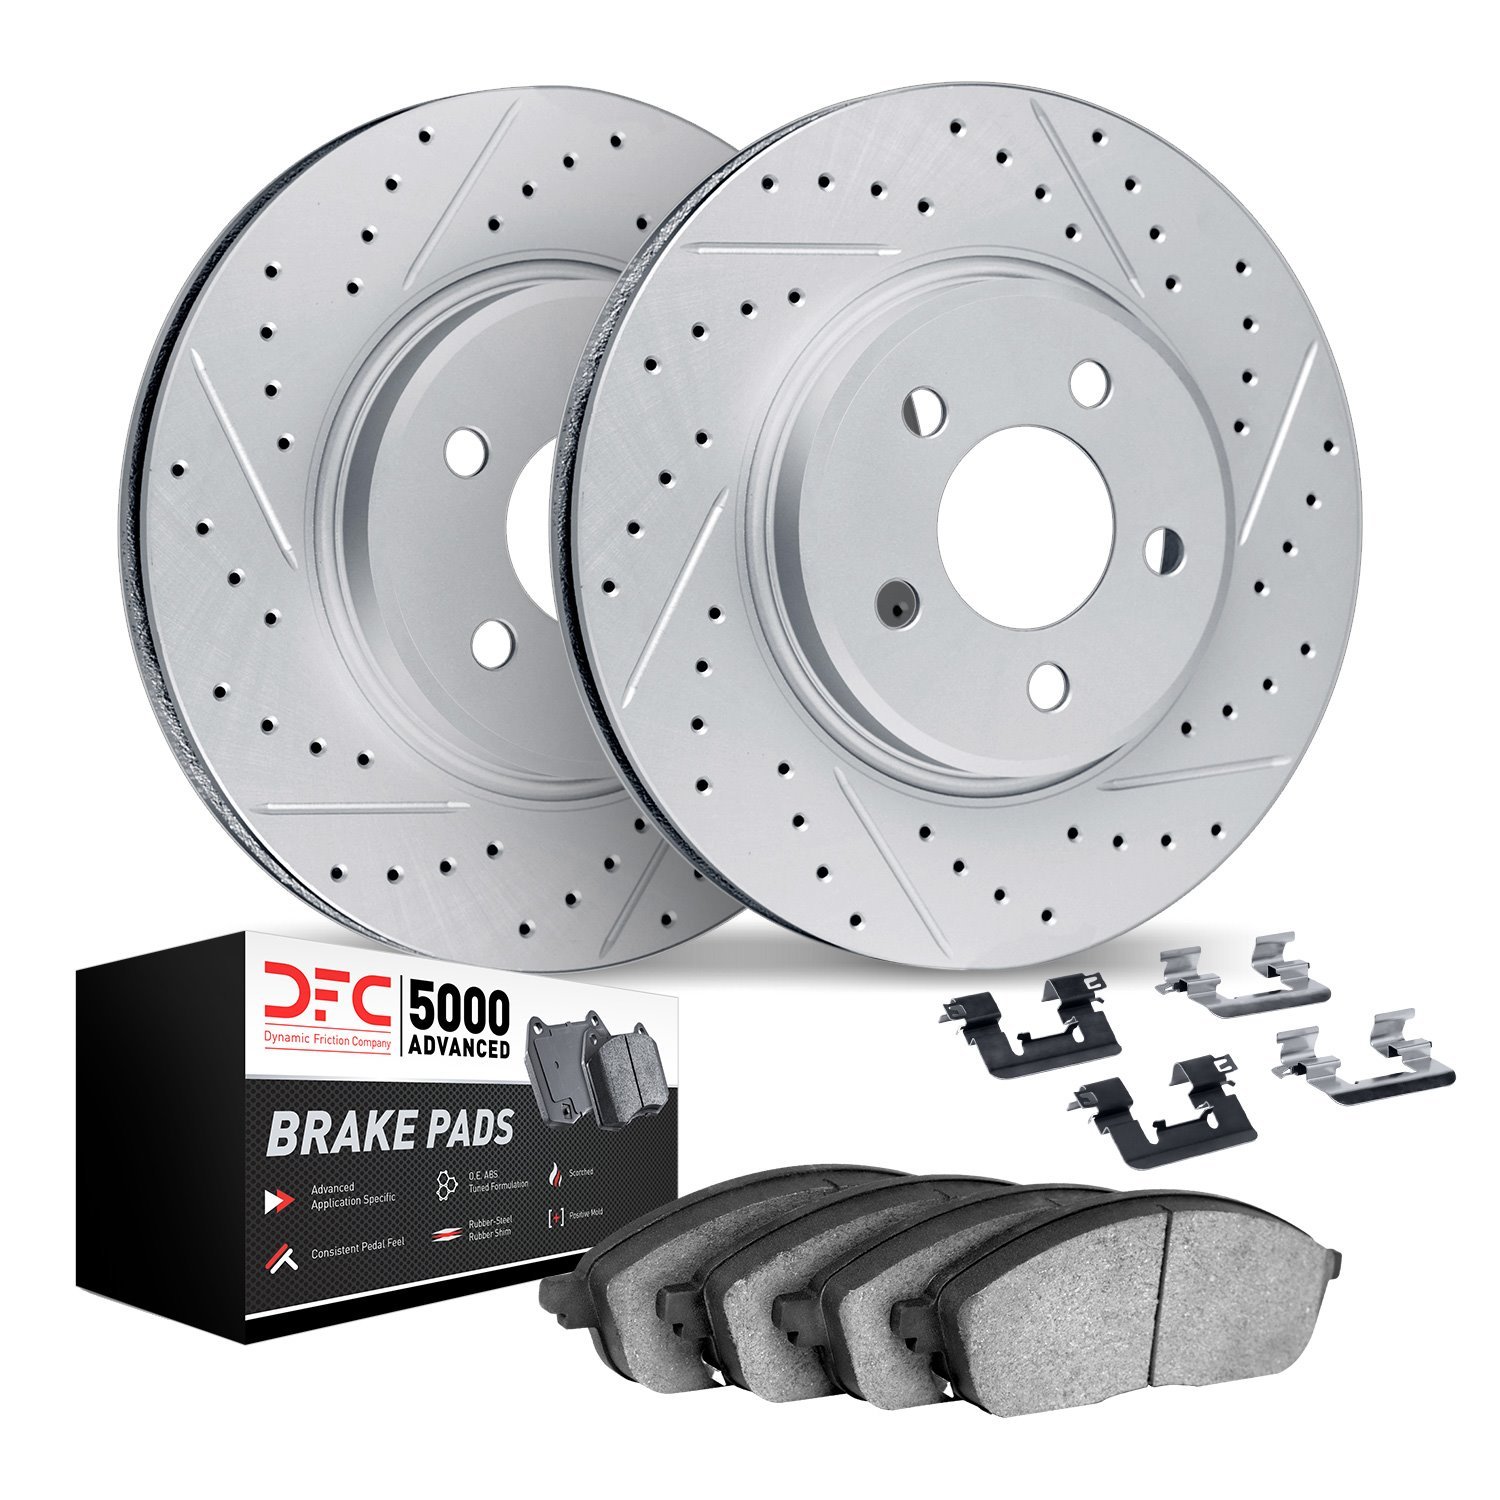 2512-11021 Geoperformance Drilled/Slotted Rotors w/5000 Advanced Brake Pads Kit & Hardware, Fits Select Land Rover, Position: Re